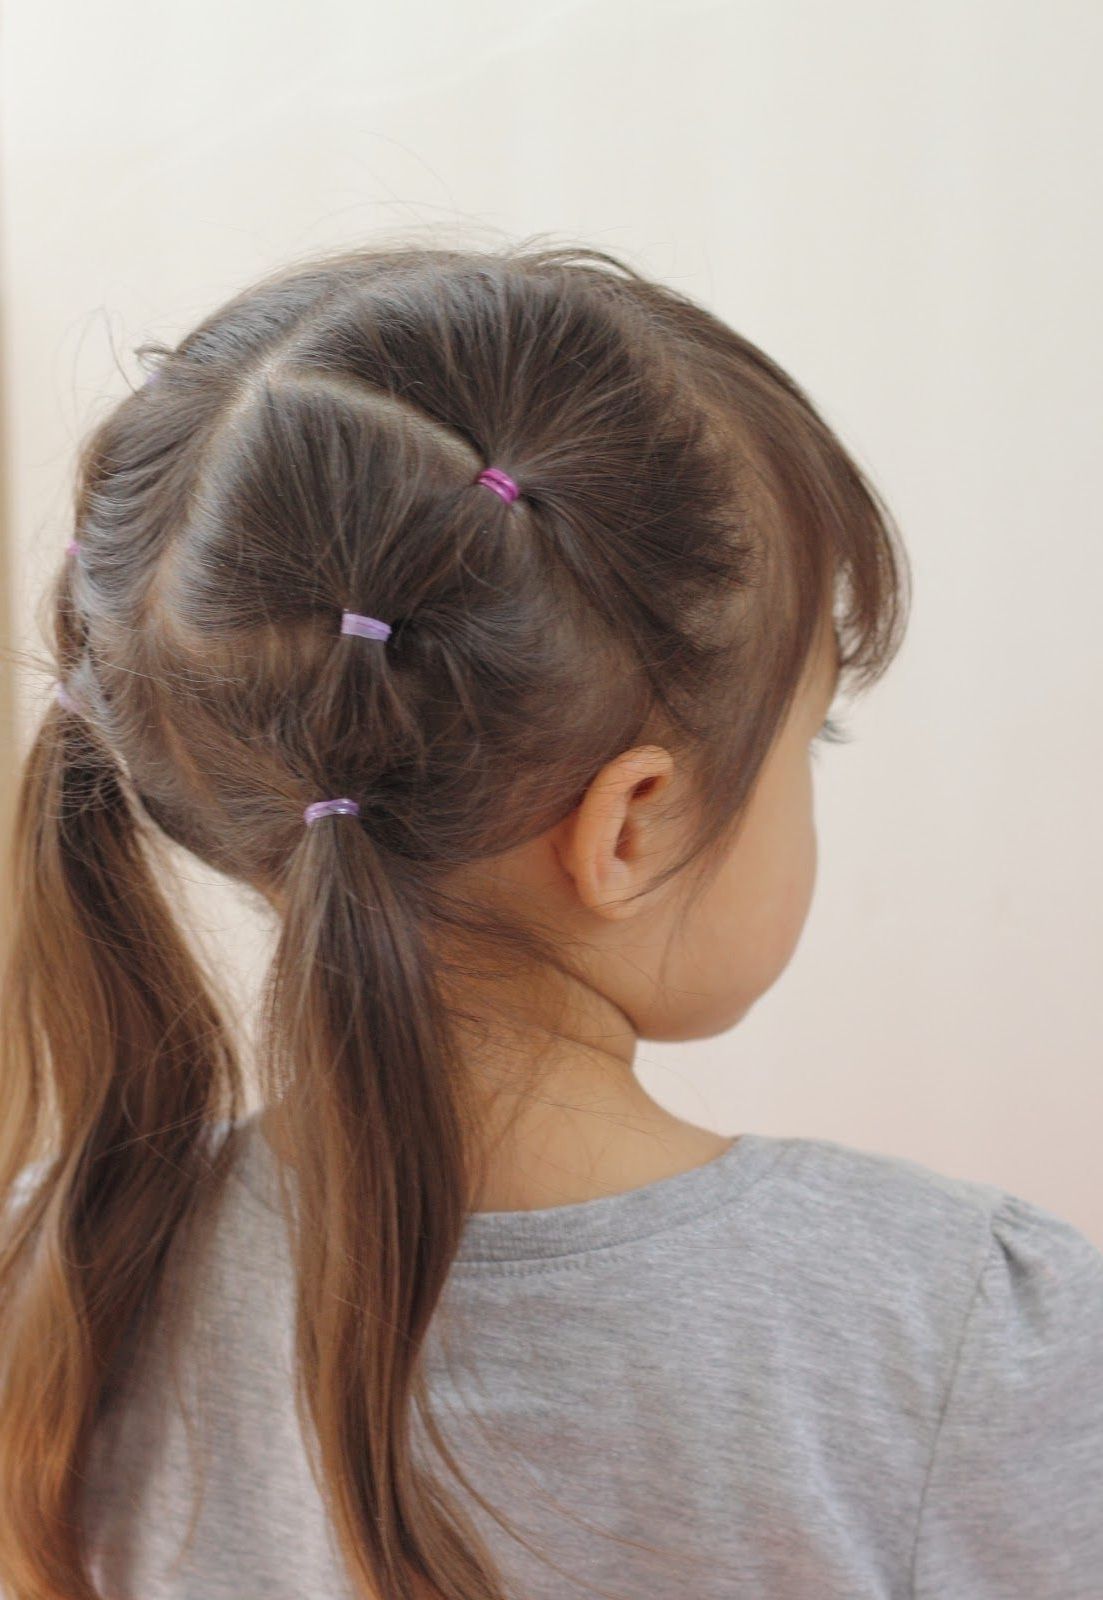 Best And Newest Dutch Inspired Pony Hairstyles Regarding 16 Toddler Hair Styles To Mix Up The Pony Tail And Simple Braids (View 1 of 20)